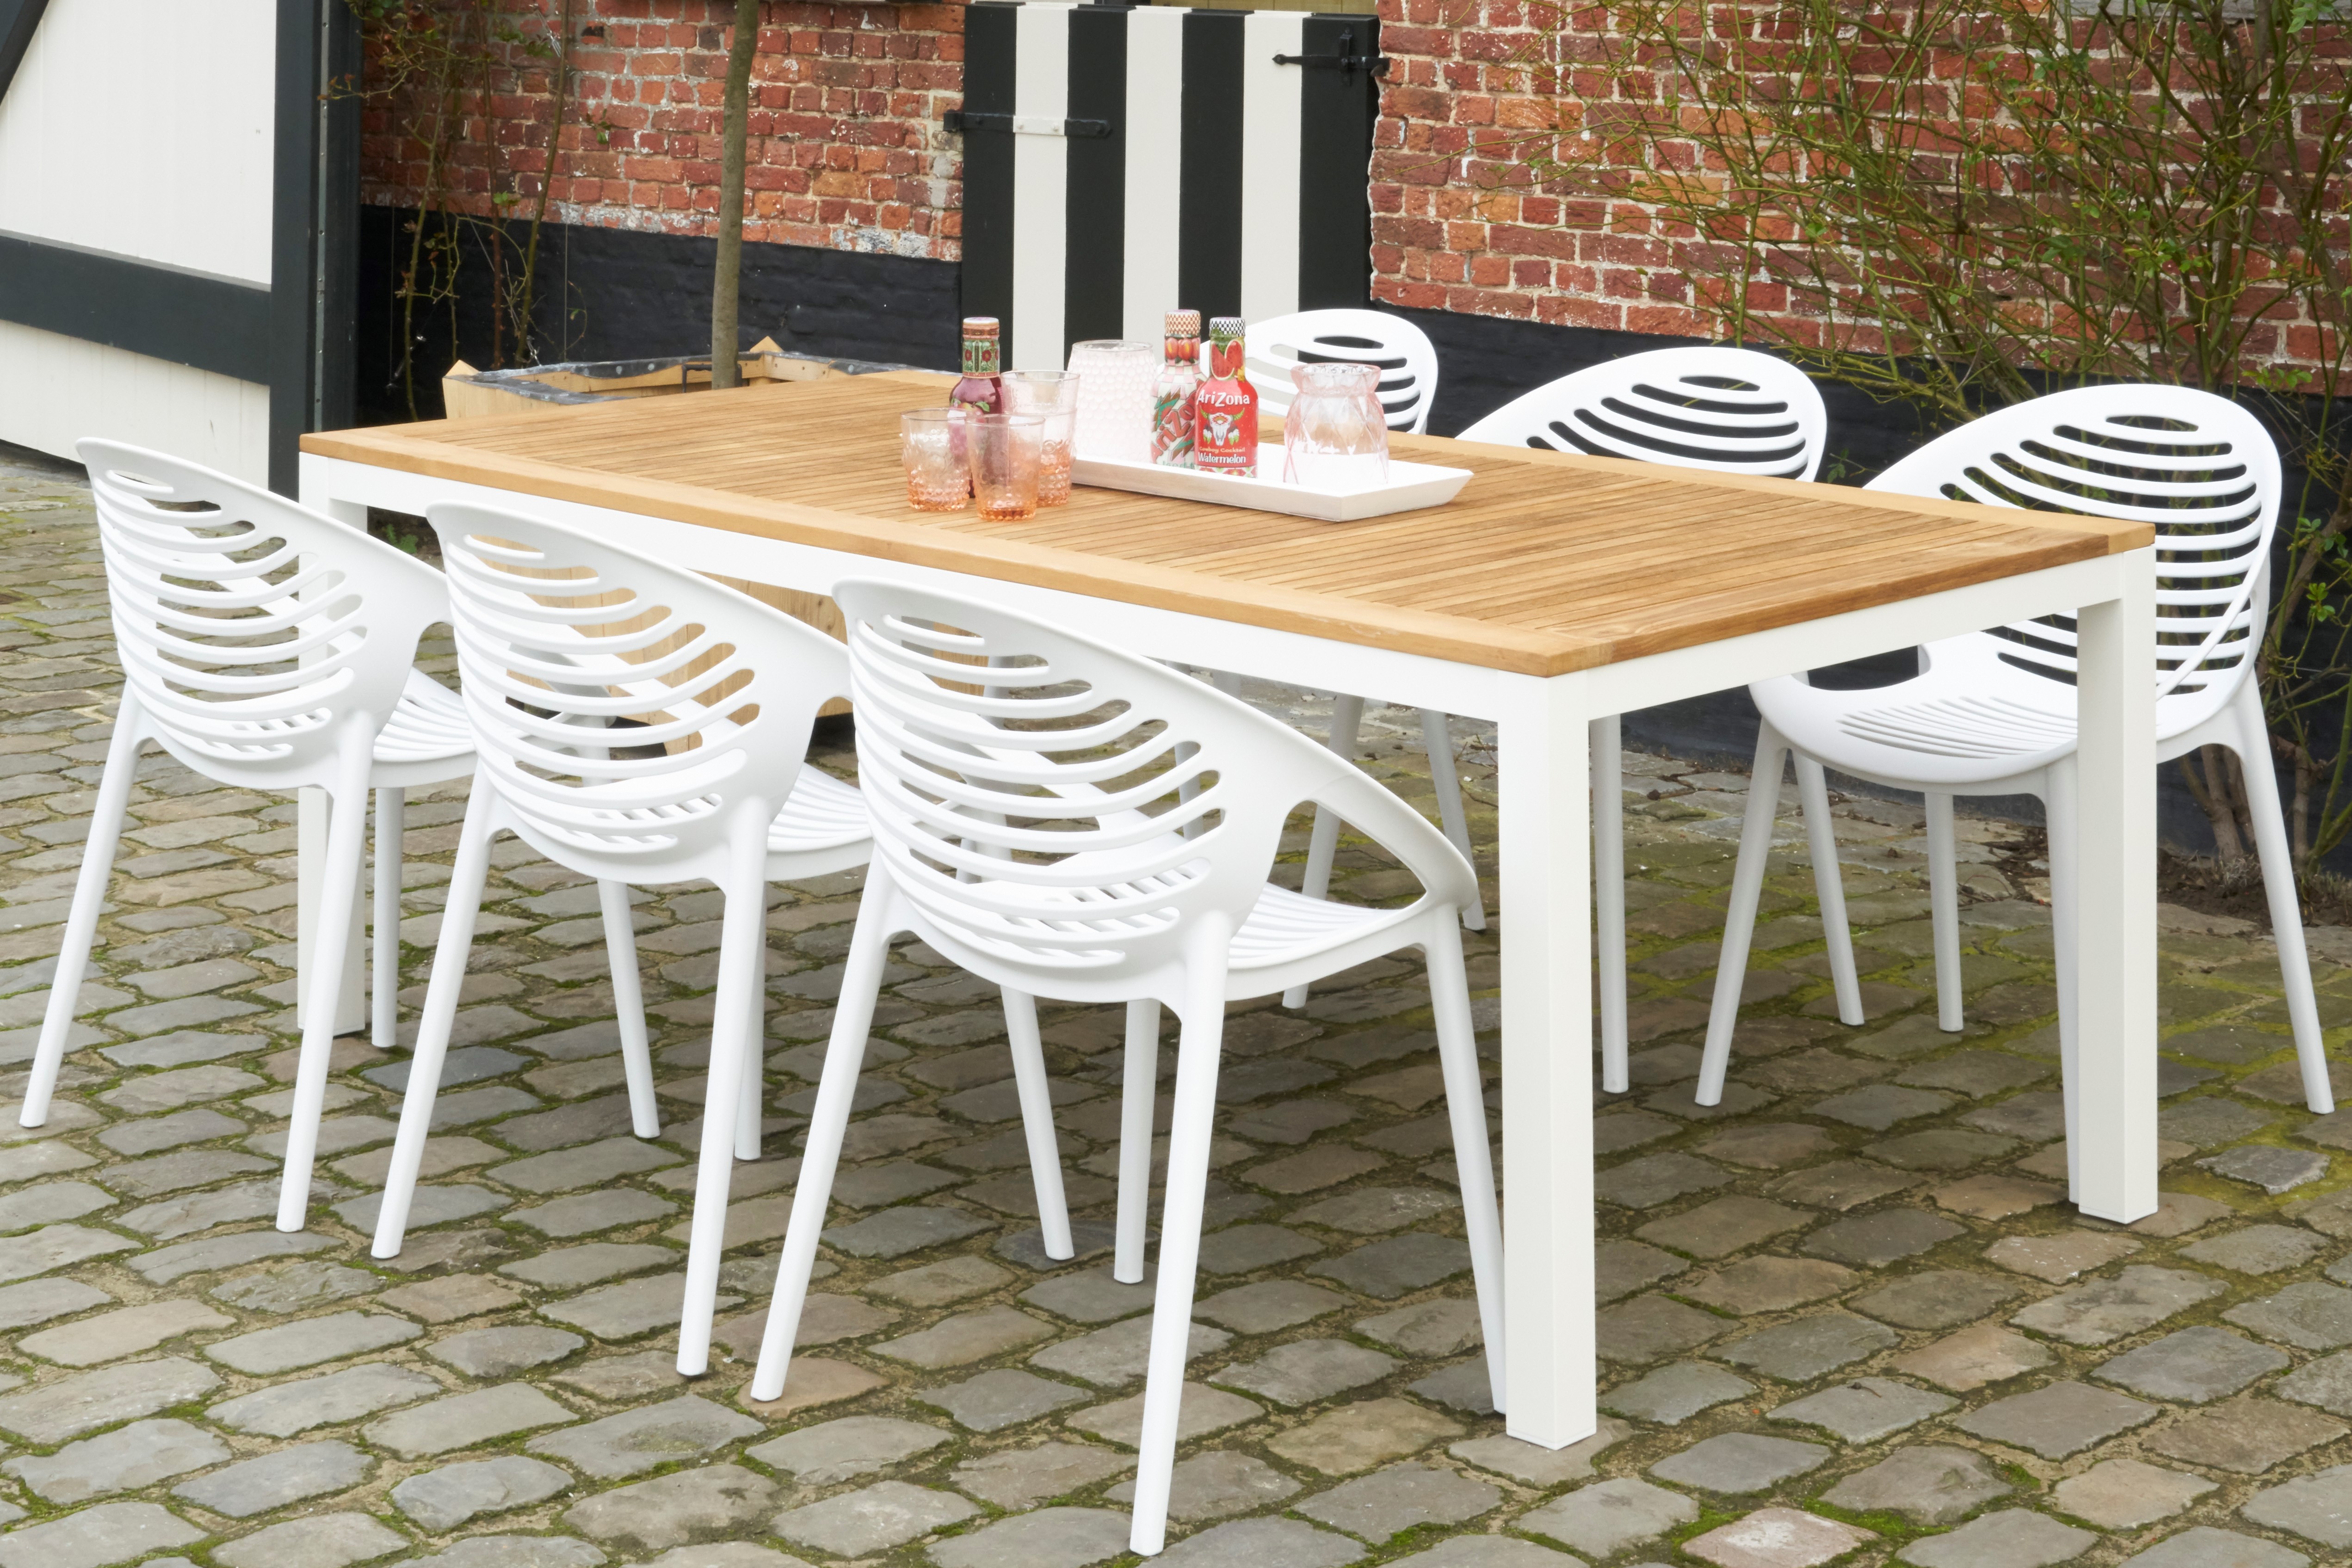 Contemporary Outdoor Dining Table And Chairs | Ricetta ed ingredienti